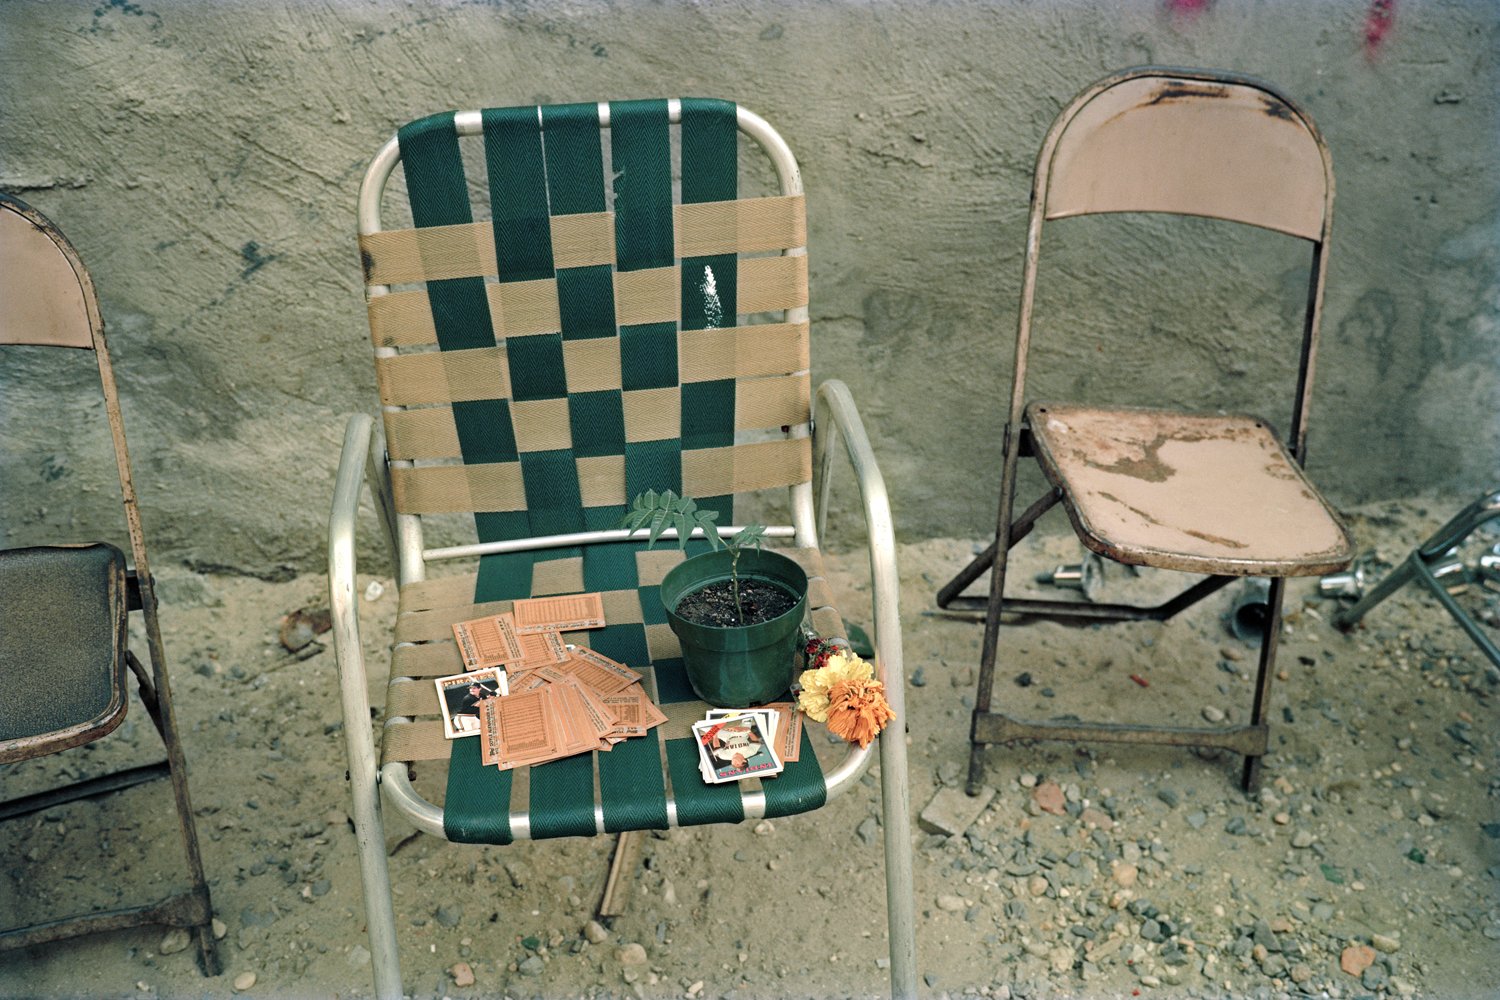 32 Cards, Plant and Chairs in Community Garden, 1989.jpg